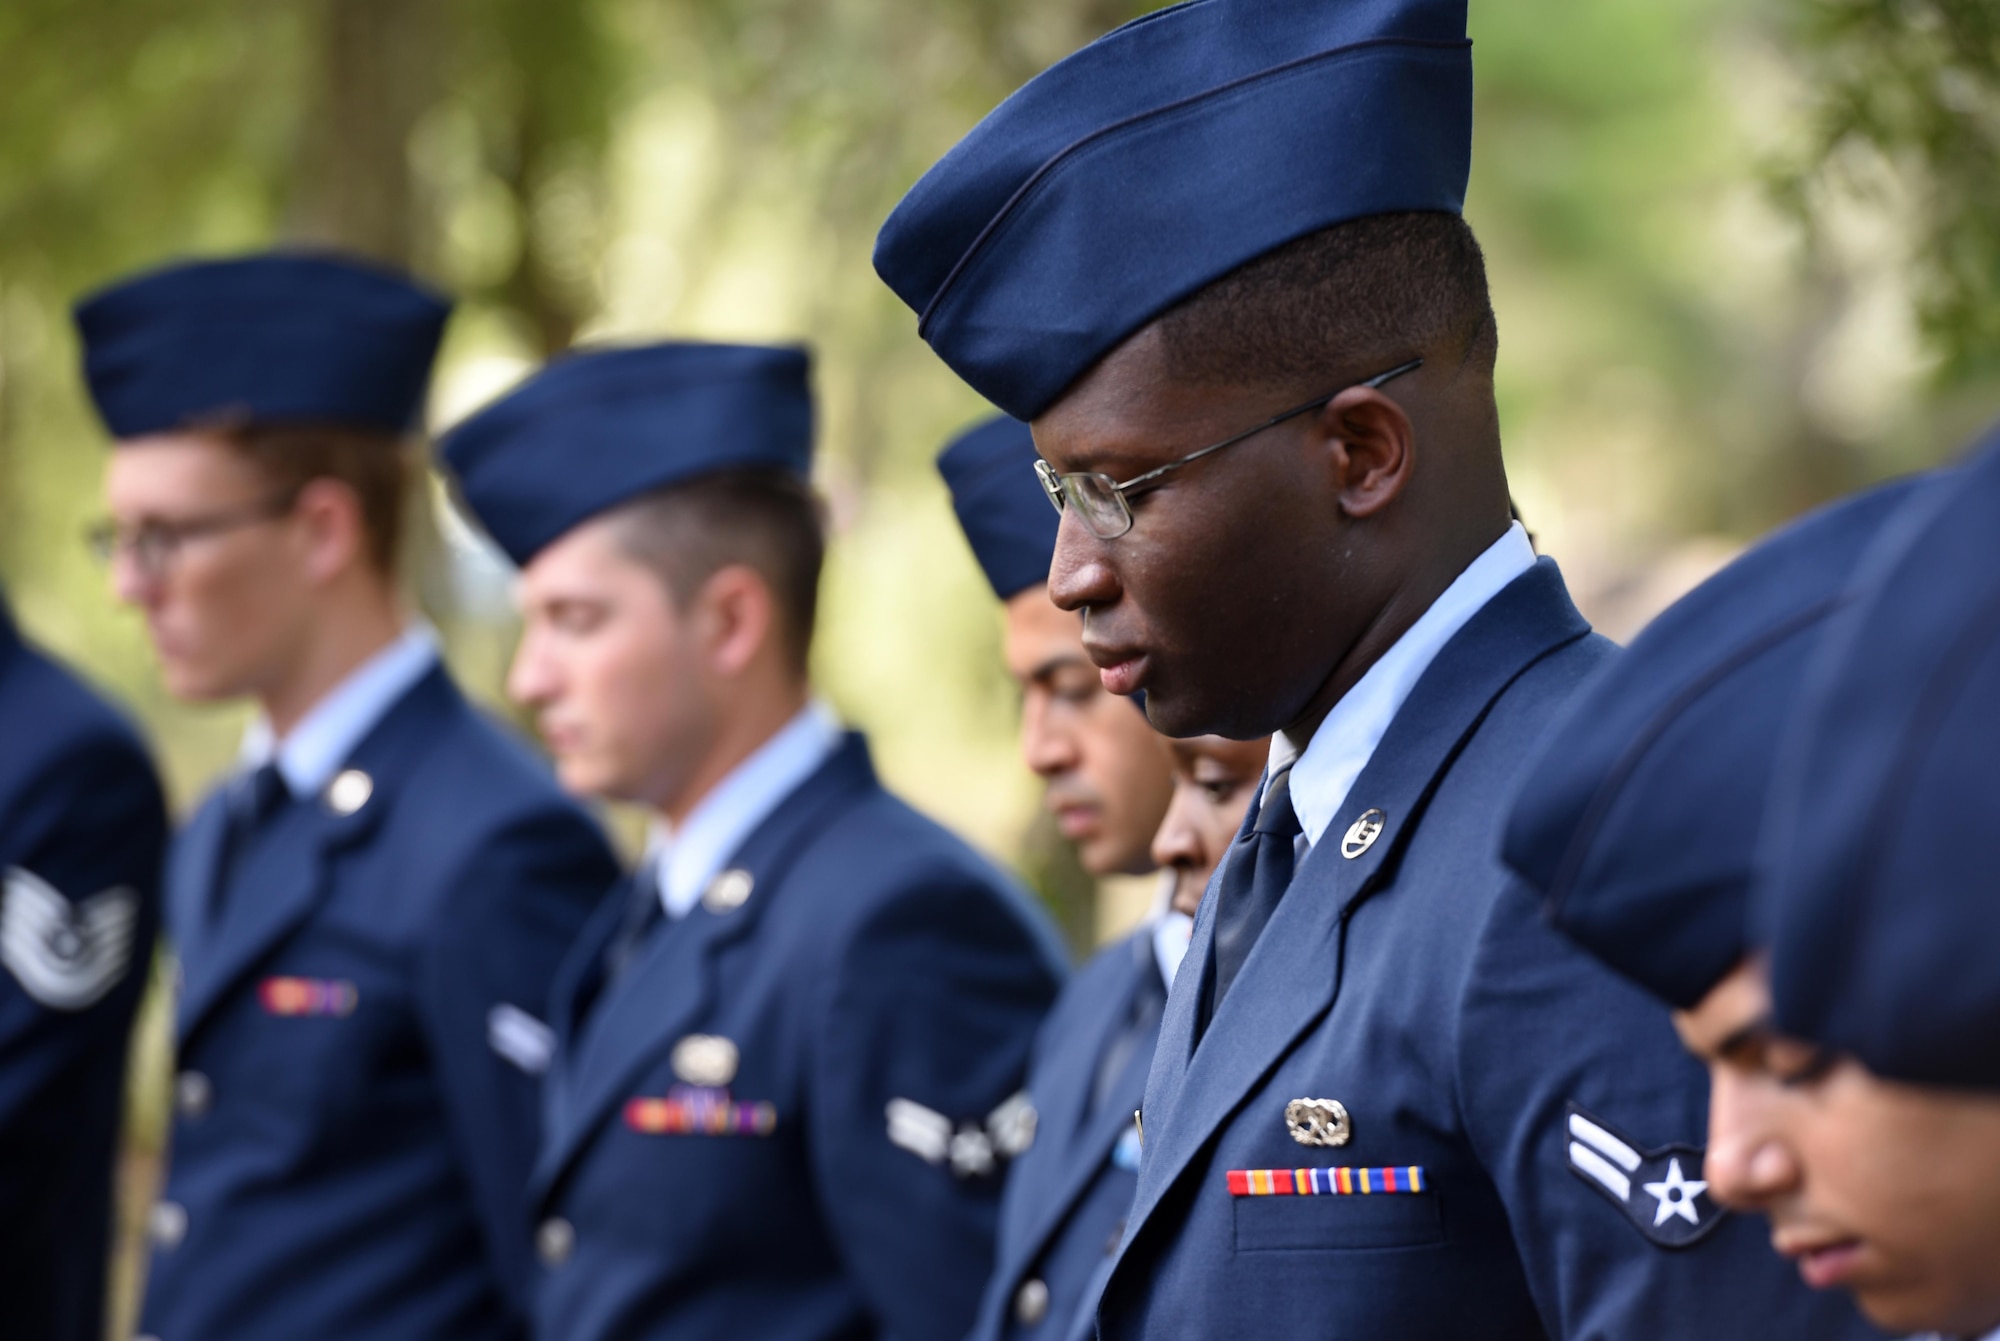 Airmen from the 33rd Fighter Wing bow their heads during the invocation for the Khobar Towers 21st Anniversary Wreath Laying Ceremony June 23, 2017, at Eglin Air Force Base, Florida. On June 25, 1996, a bomb was detonated near the Khobar Towers housing complex in Dhahran, Saudi Arabia. Nineteen Airmen were killed and more than 400 U.S. and international military and civilians were injured in the blast.  Of the 19 killed, 12 were Nomads. Each year the 33 FW holds a ceremony in remembrance of that day. (U.S. Air Force photo by Staff Sgt. Peter Thompson)